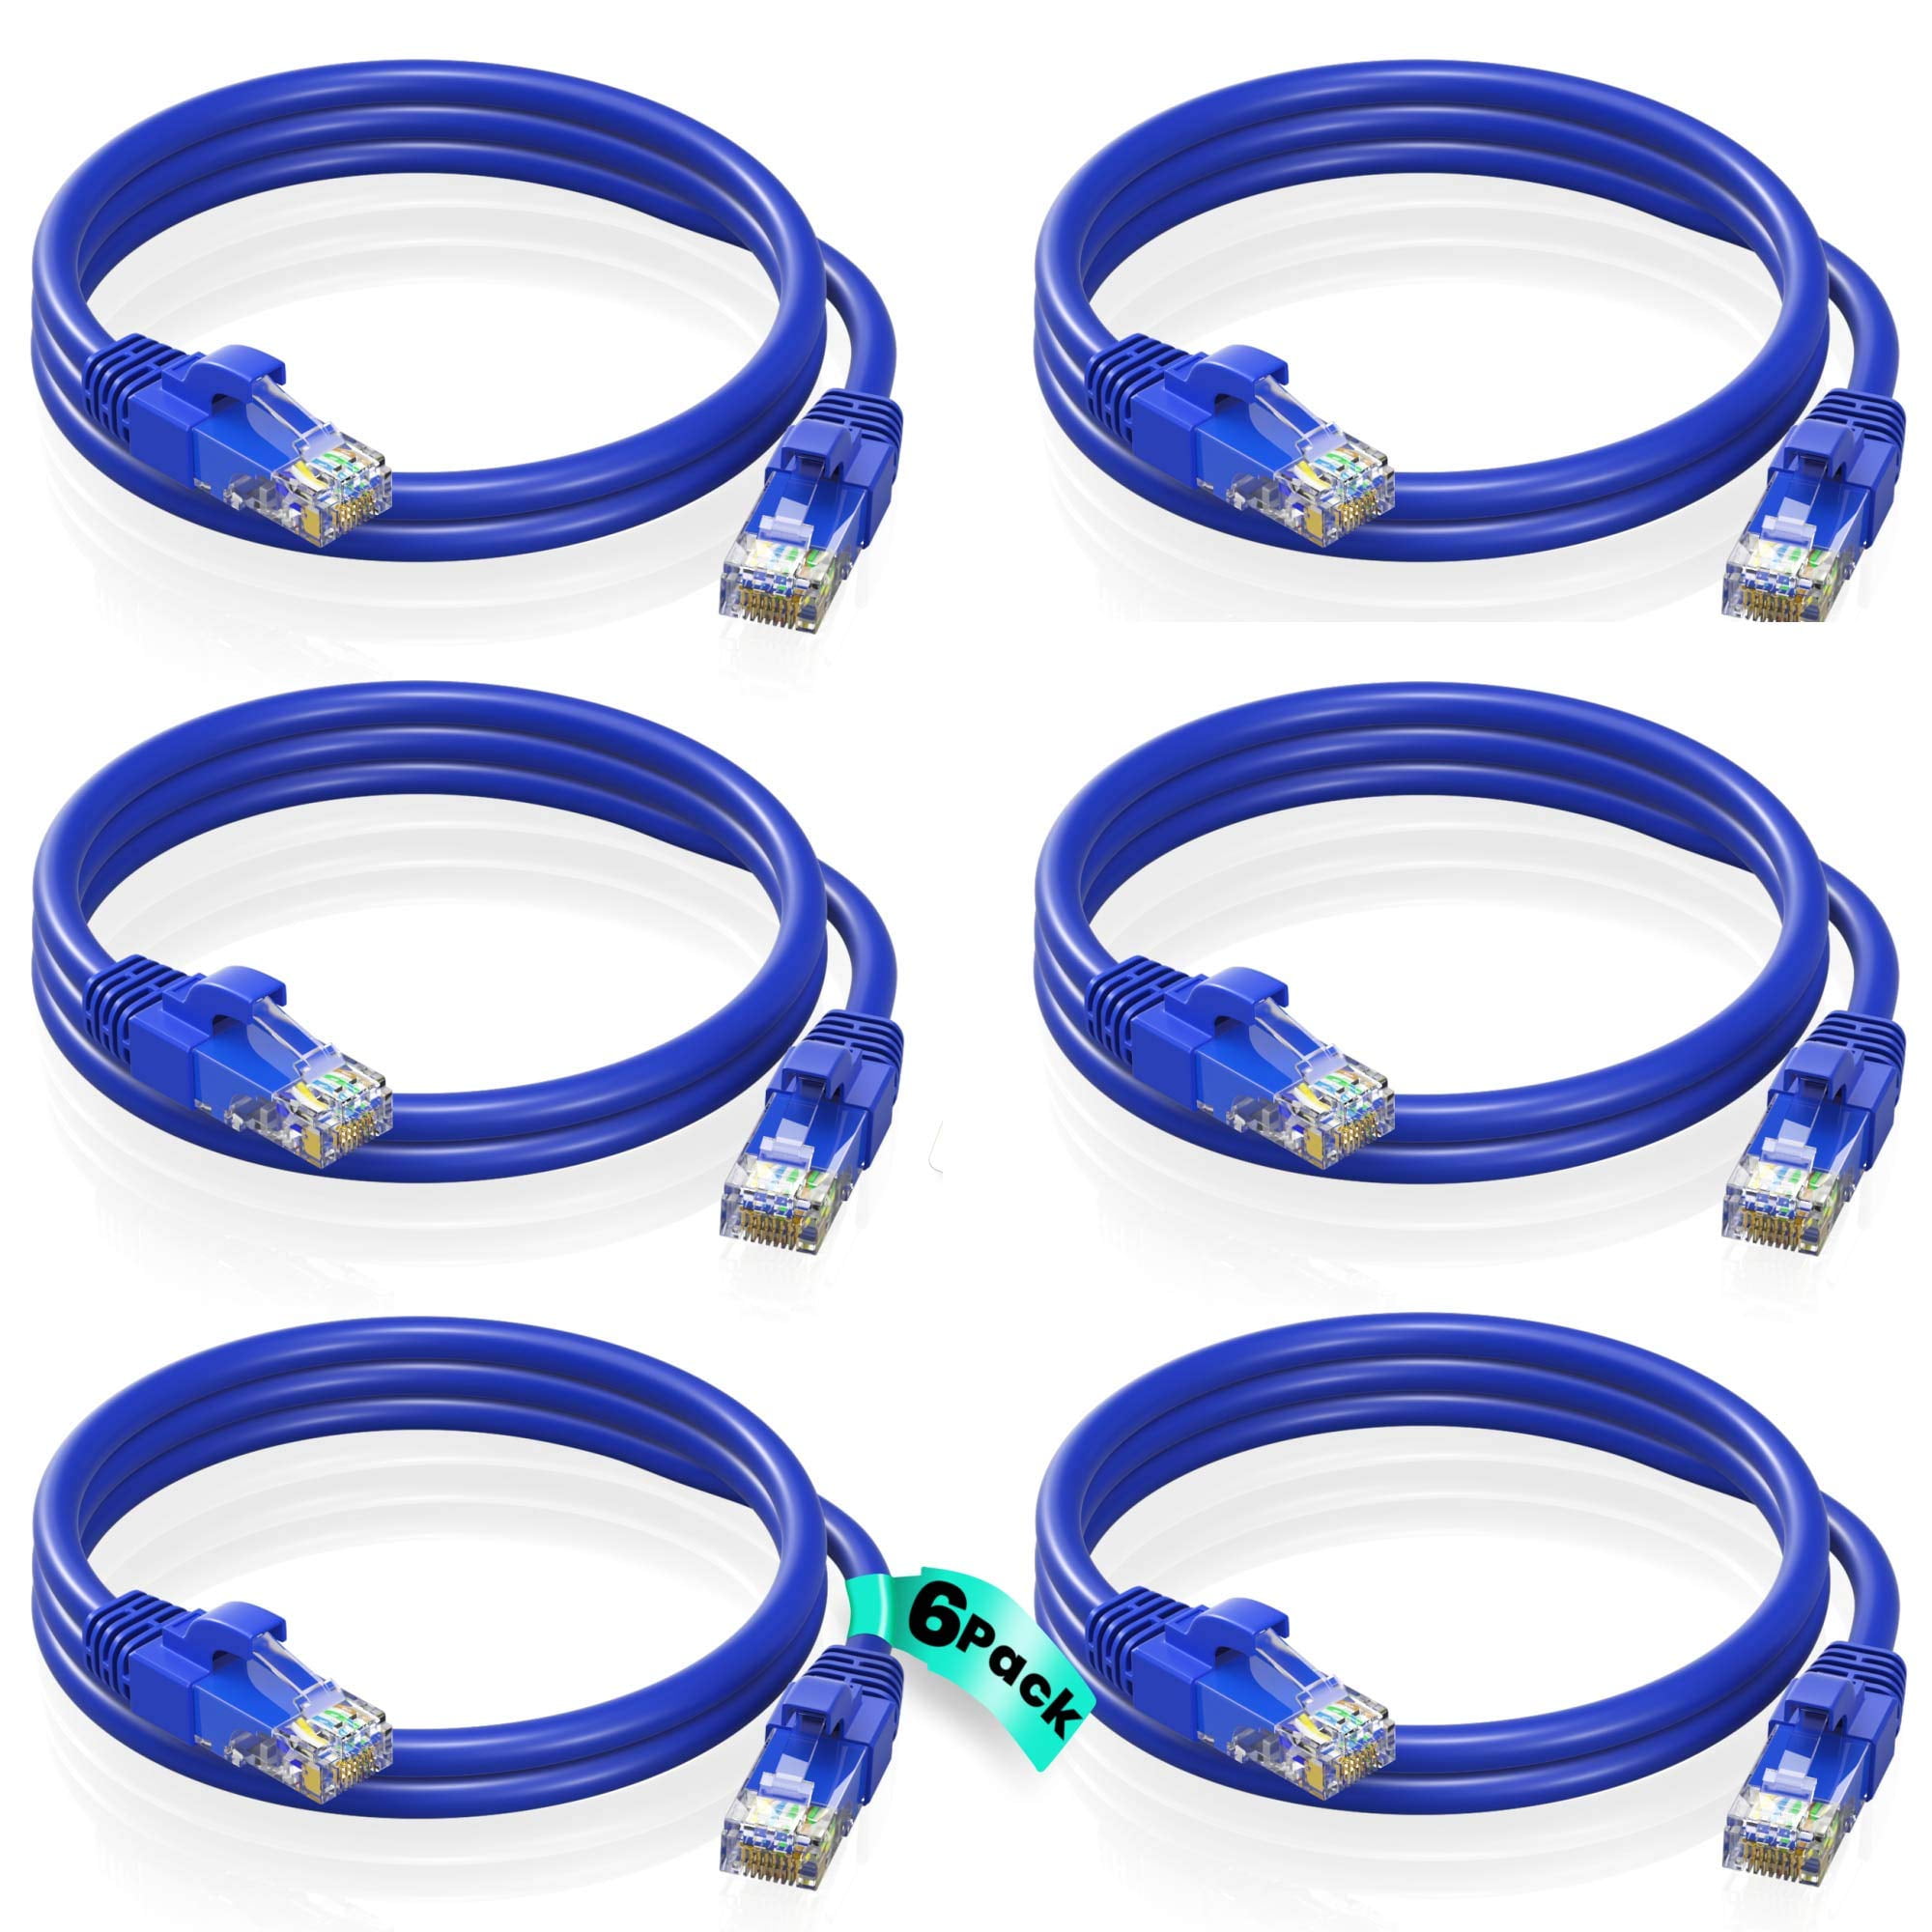 10 Pack 2FT Cat6 Blue Ethernet Network Patch Cable RJ45 Lan Wire 2 Feet 